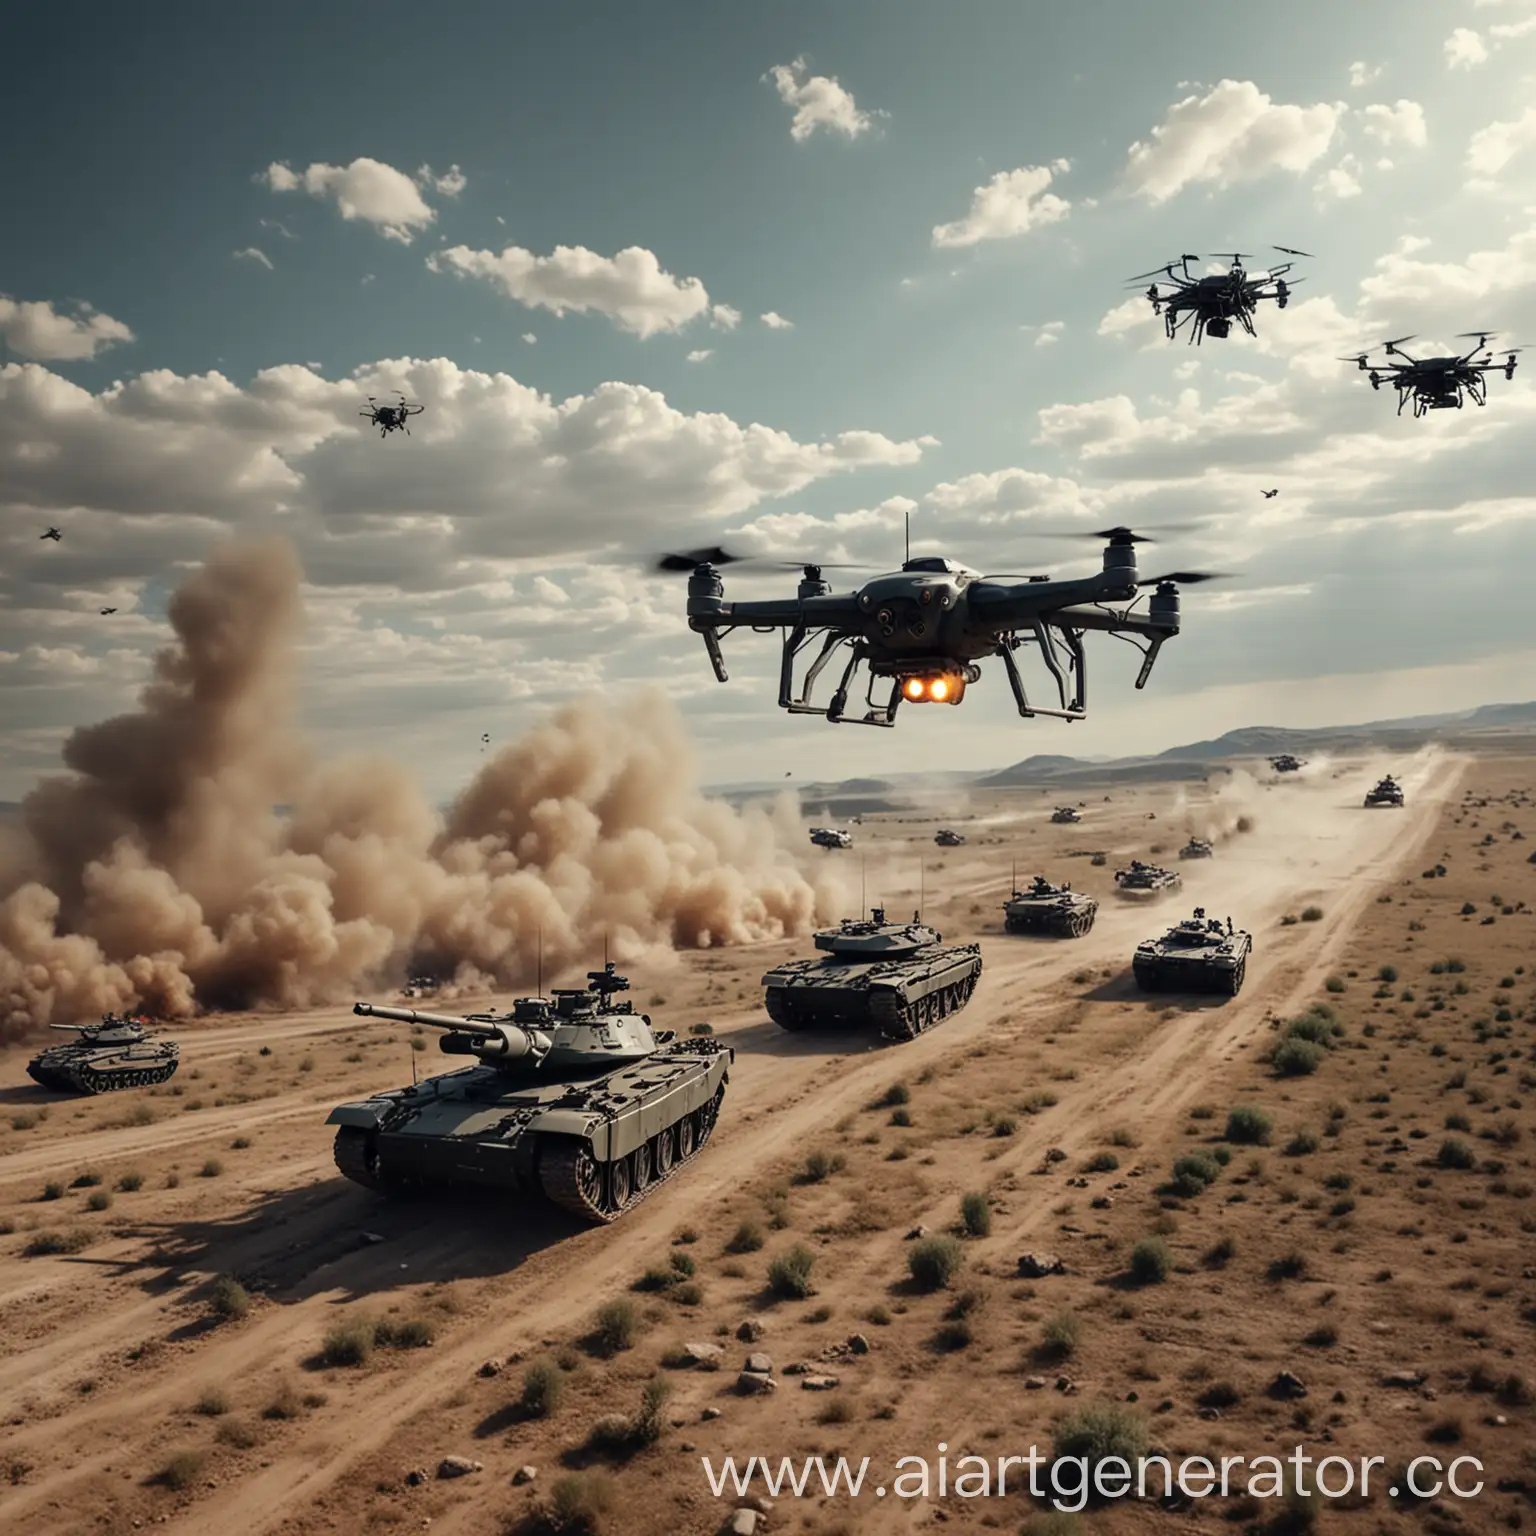 Military-Quadrocopter-Surveillance-Over-Battlefield-with-Tanks